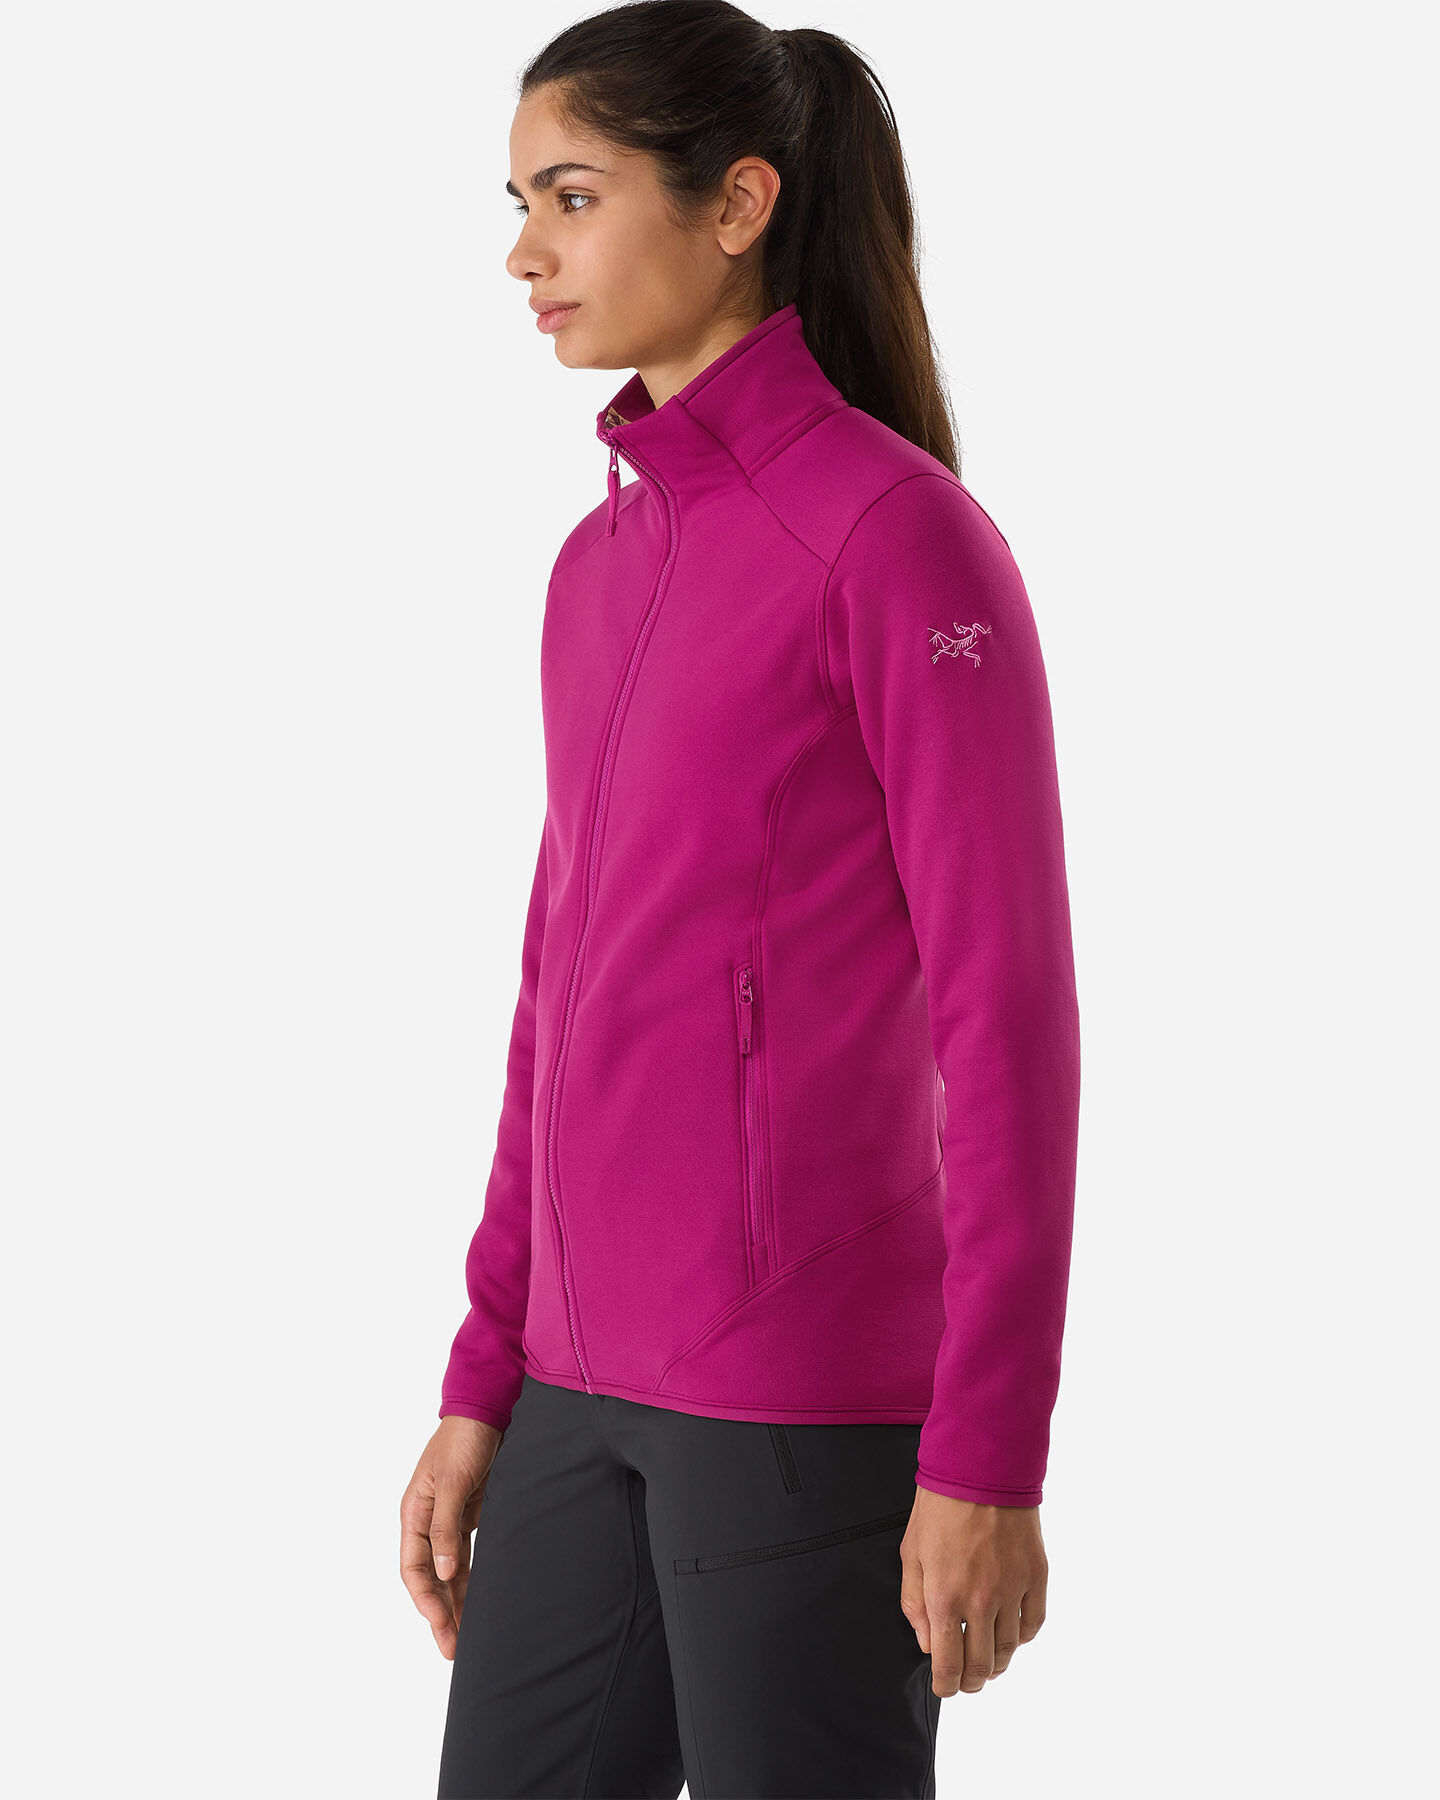  Pile ARC'TERYX KYANITE SYNTH W S4114898|1|XS scatto 4